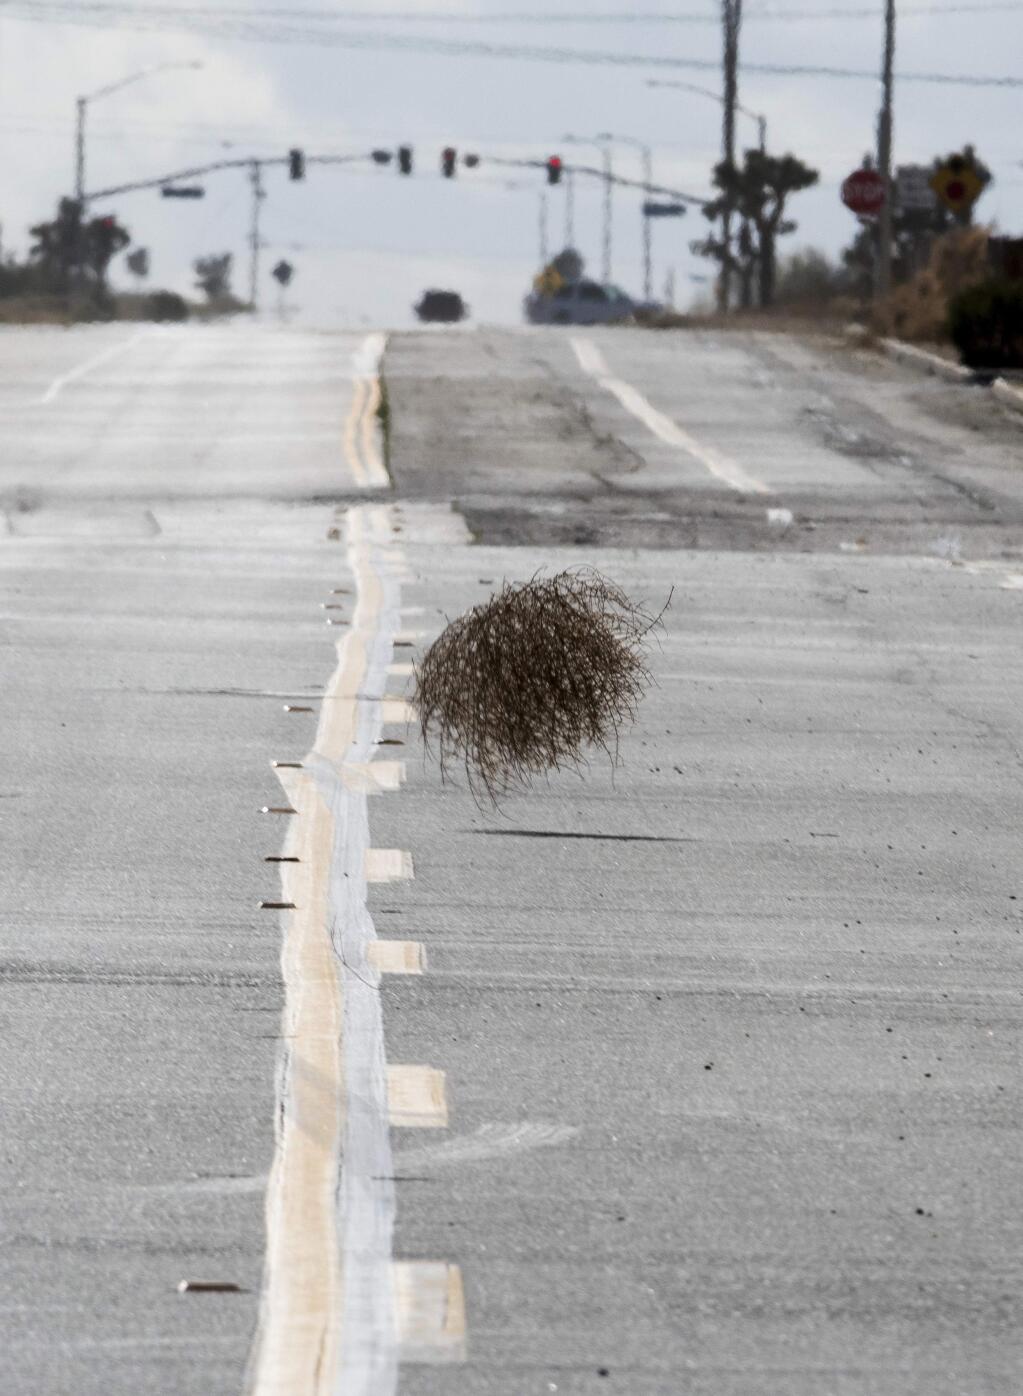 A tumbleweed blows across Eucalyptus Road in Victorville, Calif., Monday, April 16, 2018. The southwest corner of the city was pounded with the weeds as high winds persisted throughout the day. (James Quigg/The Daily Press via AP)